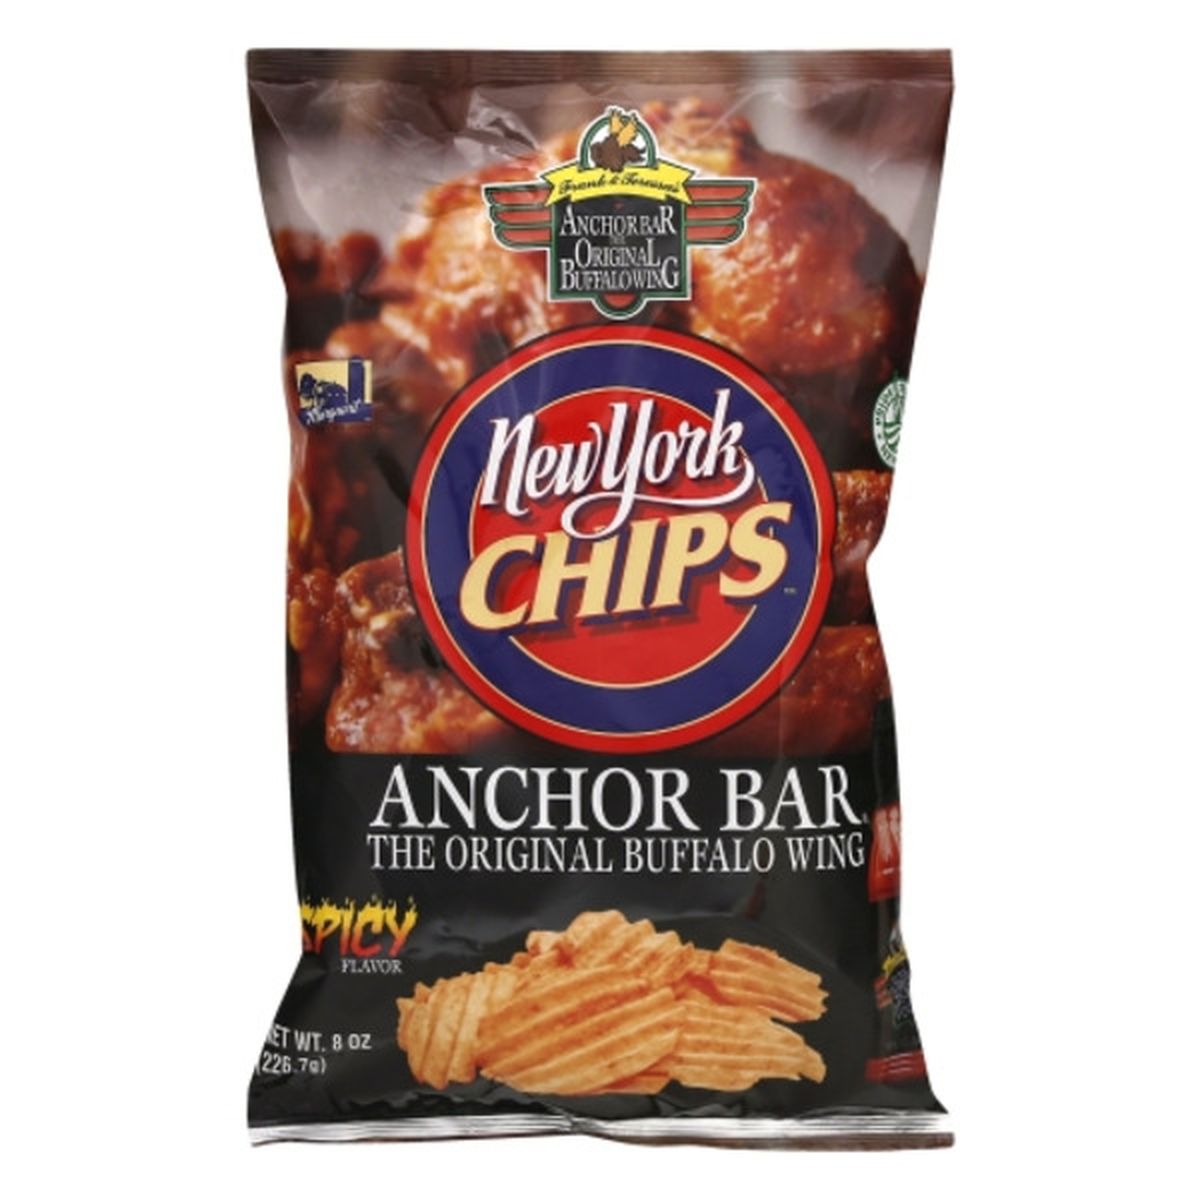 Calories in New York Chips Potato Chips, Anchor Bar Spicy Flavor